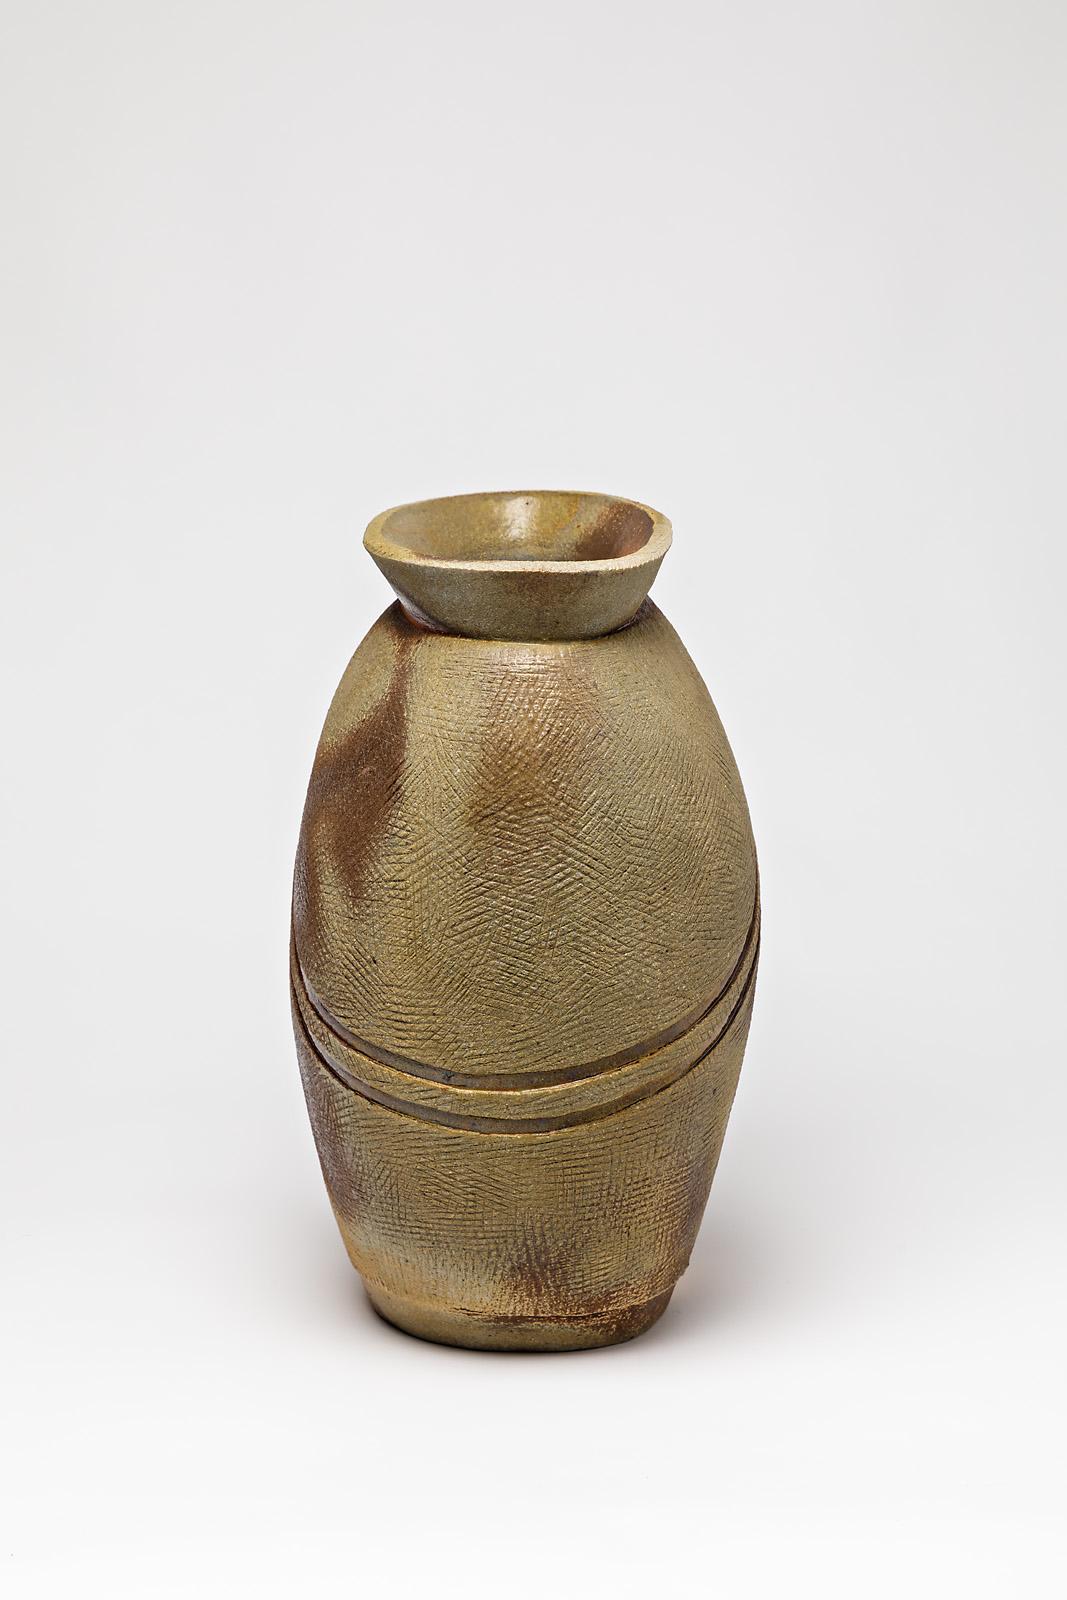 Ceramic Vase by Guieba, Signed, 1980-1990 For Sale 1